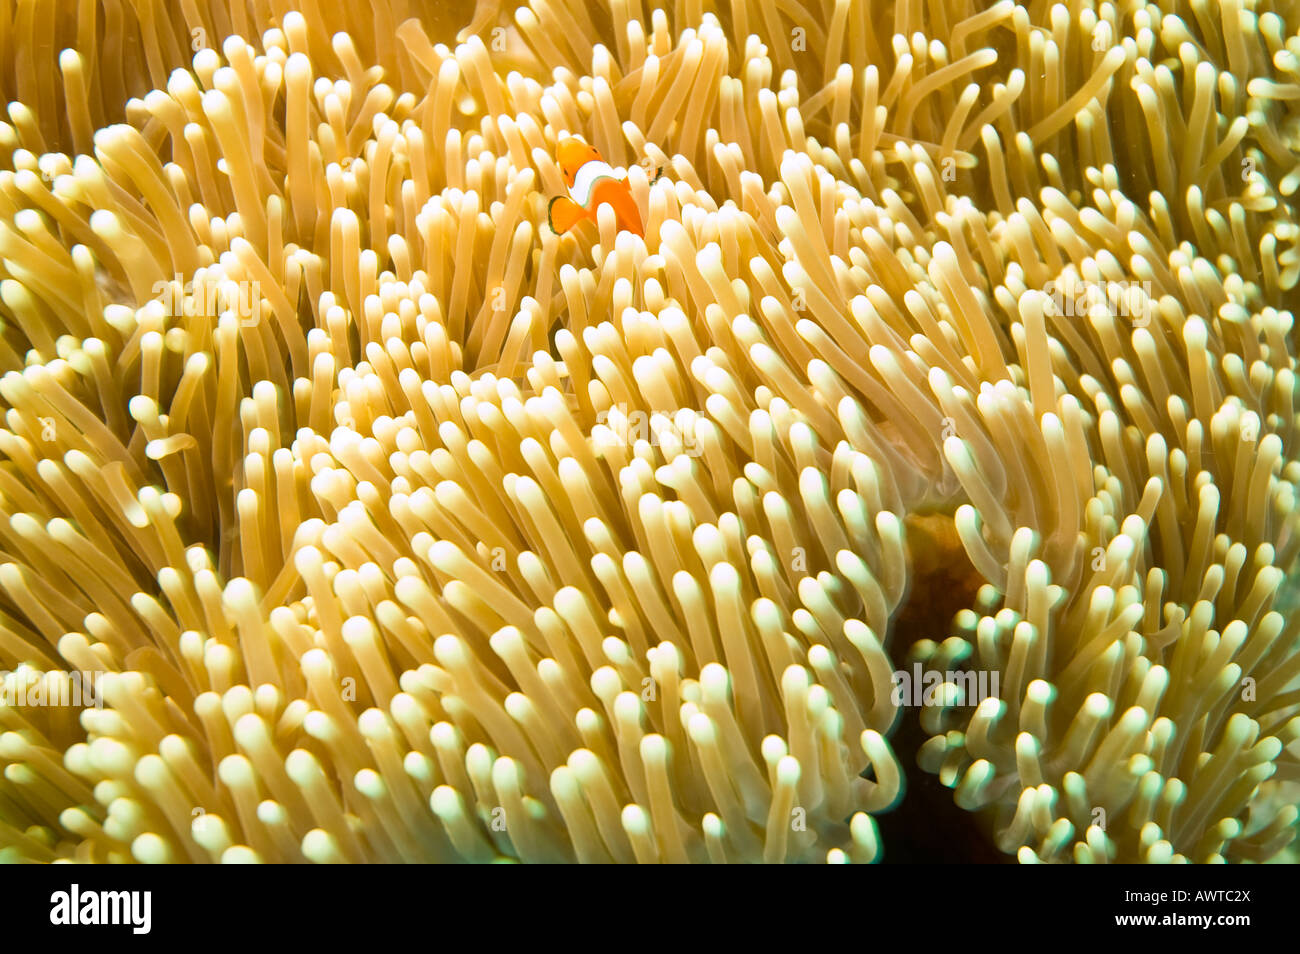 anemone with orange and white clown fish on great barrier reef australia Stock Photo